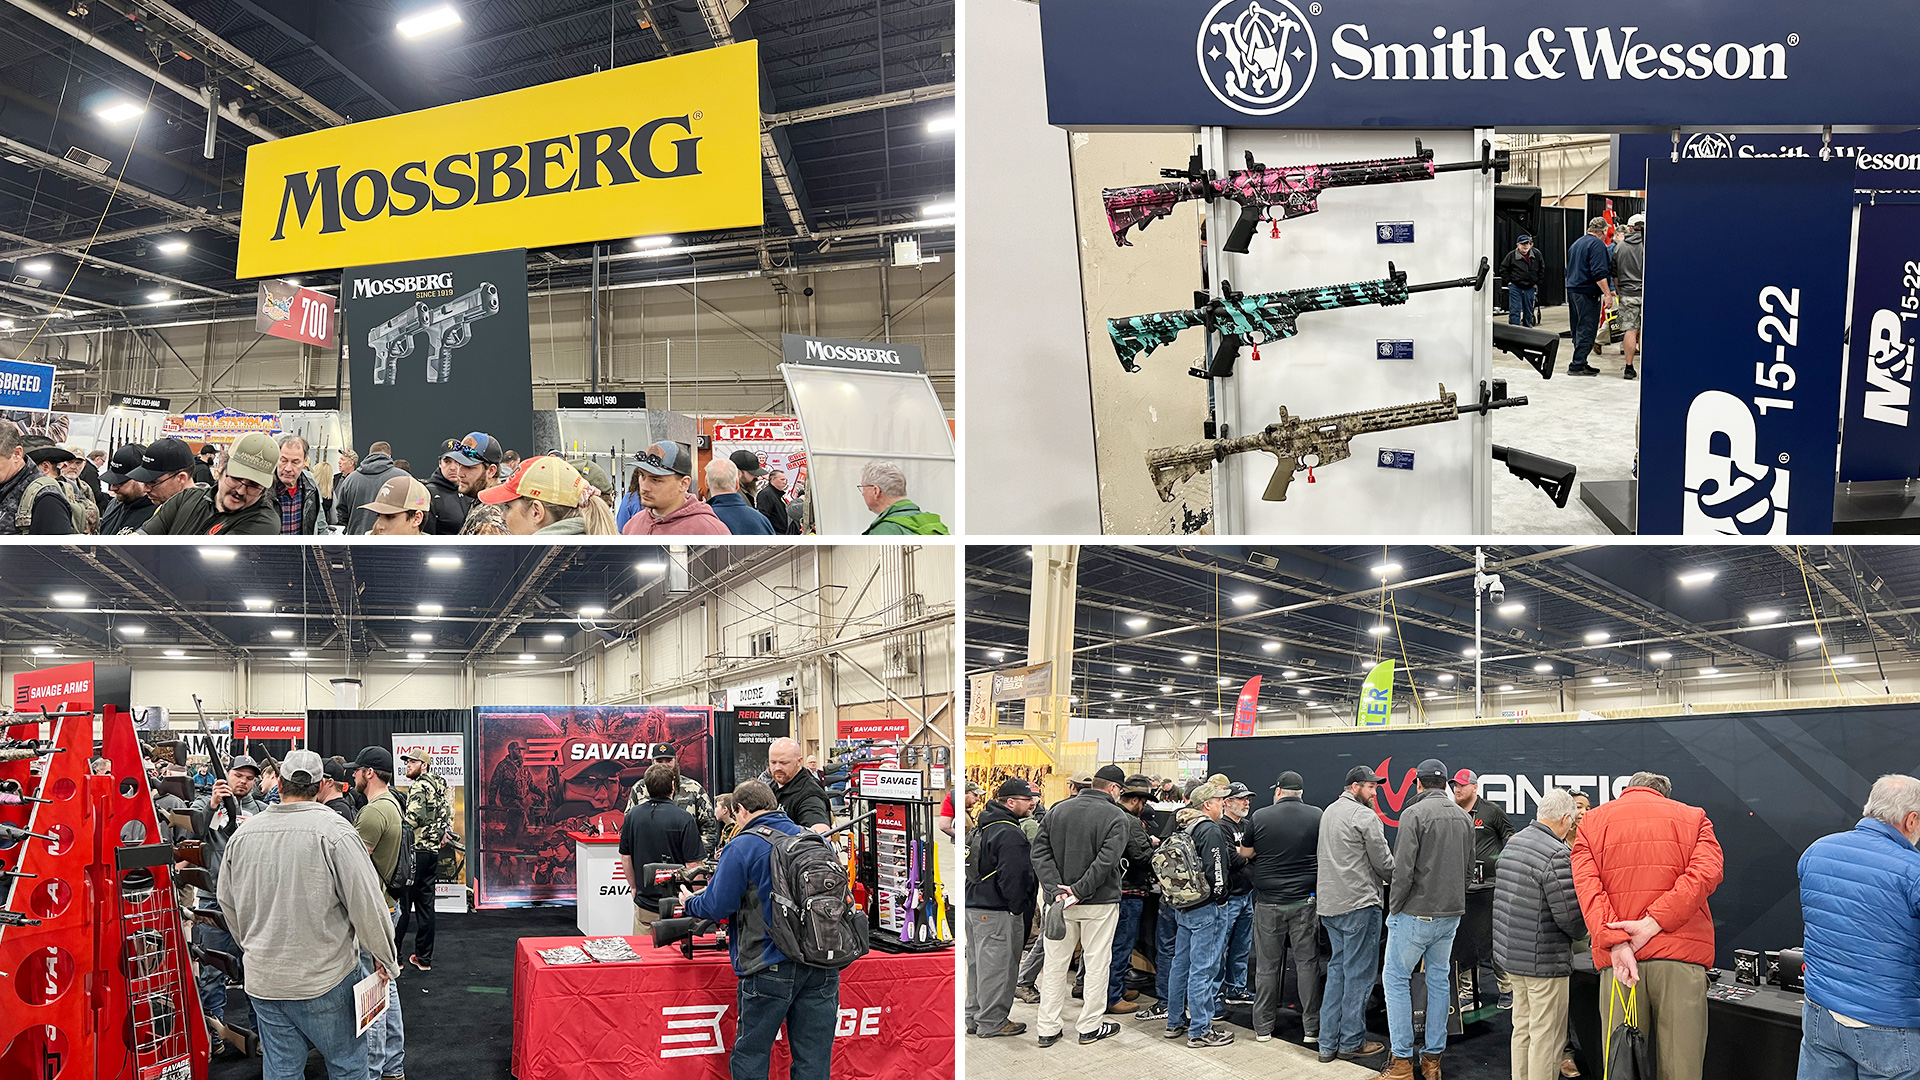 The show floor was packed with many well-known brands and manufacturers.